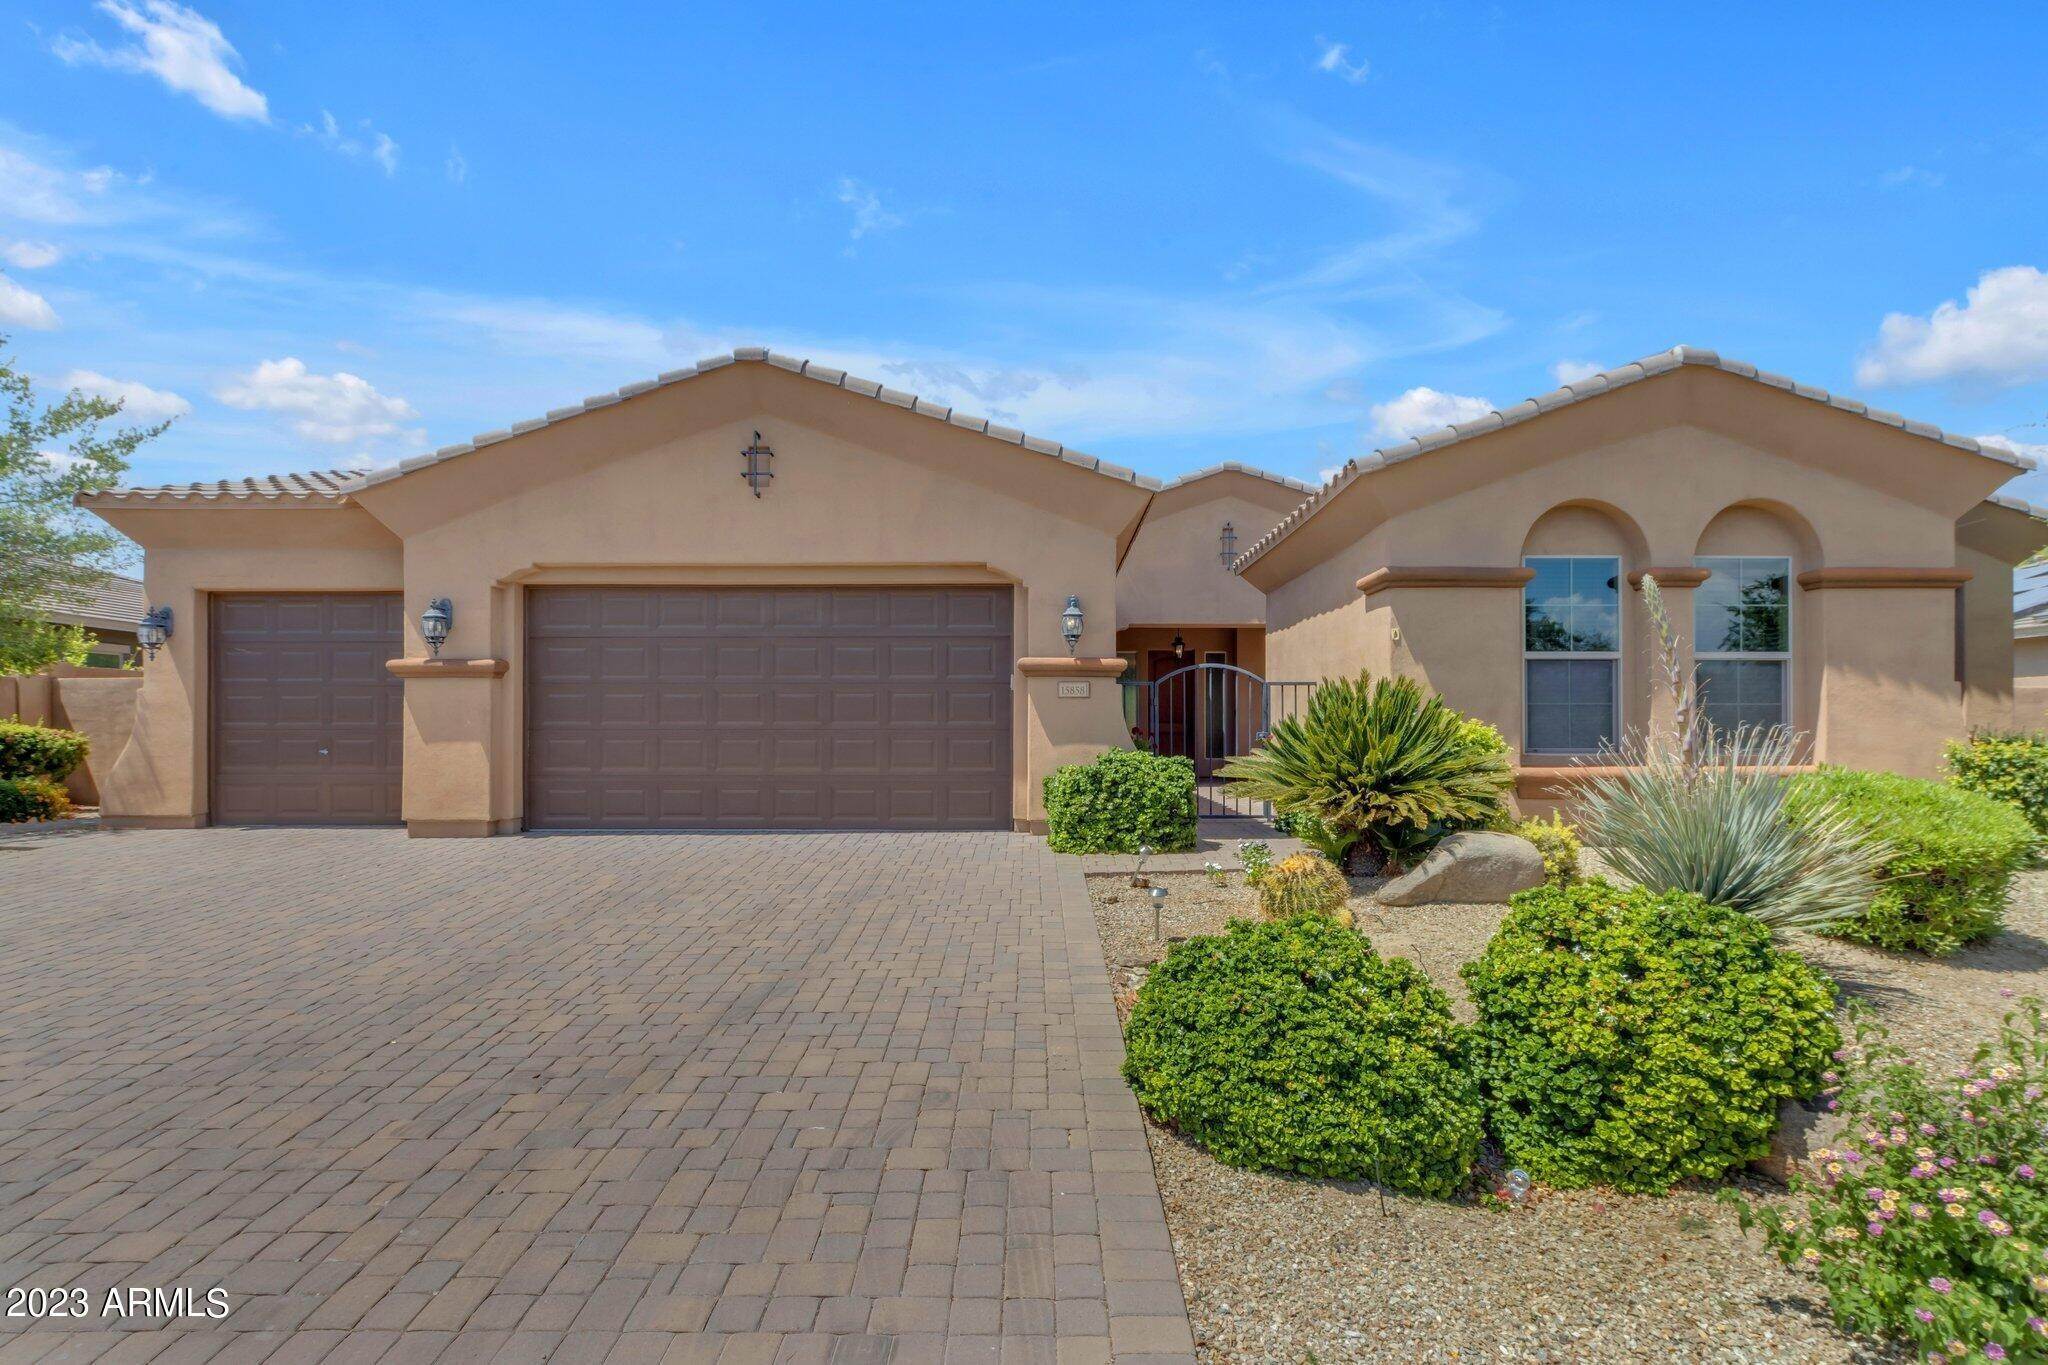 37. Single Family for Sale at Goodyear, AZ 85395